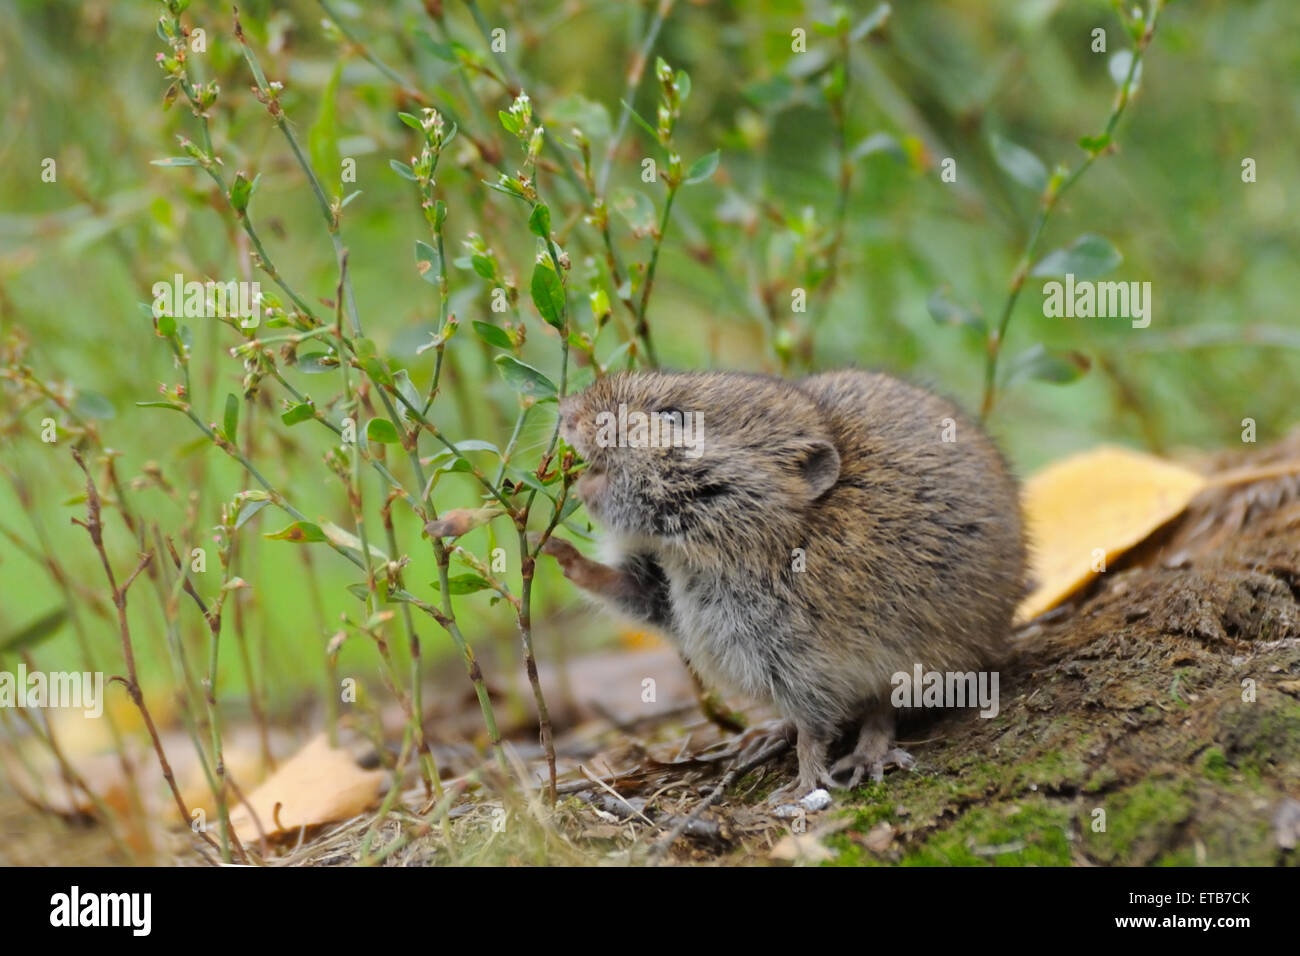 Common vole eats seeds of field grasses Stock Photo